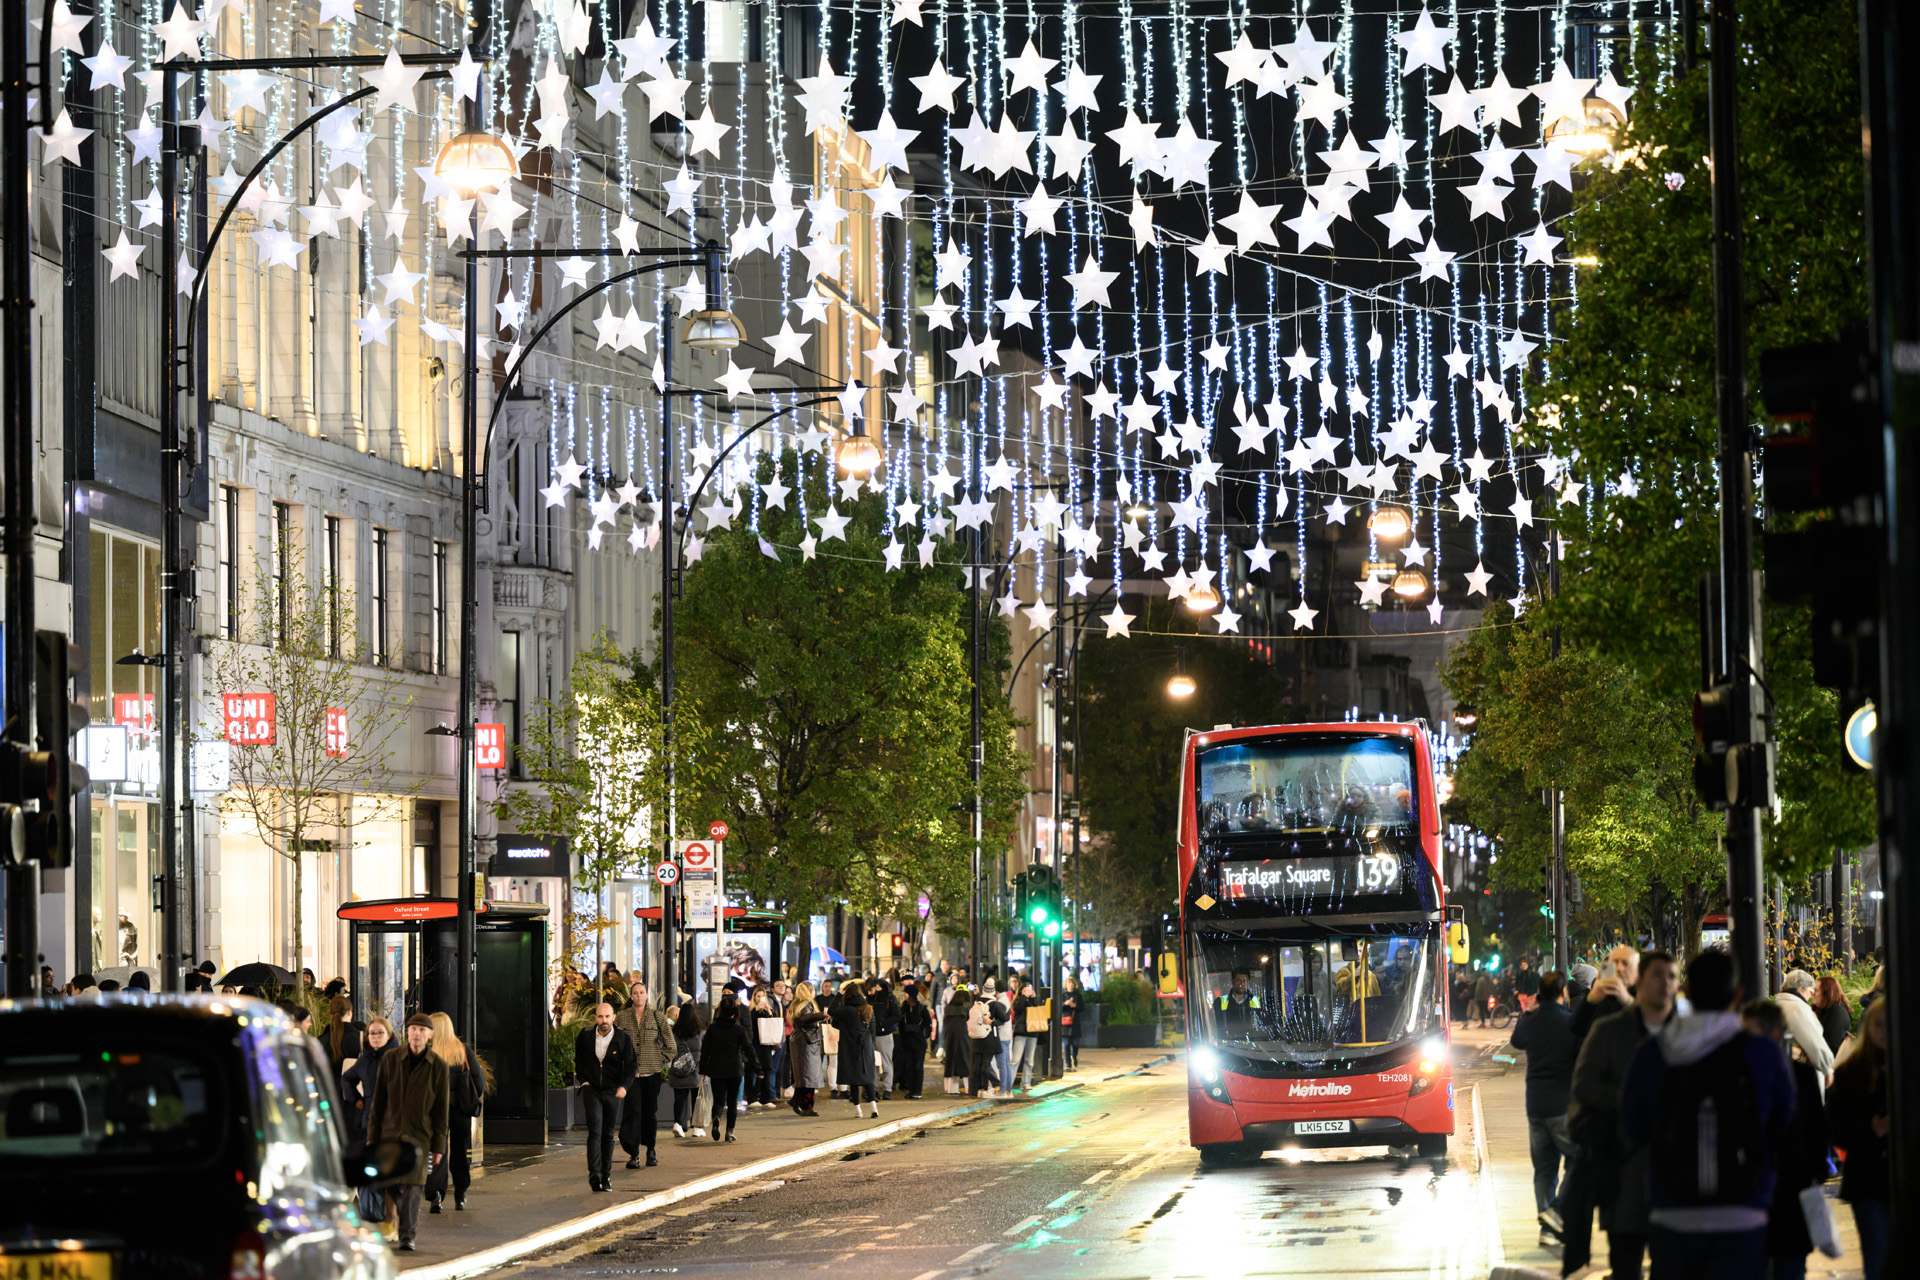 The Oxford Street Christmas lights in partnership with children's charity Starlight were switched on tonight